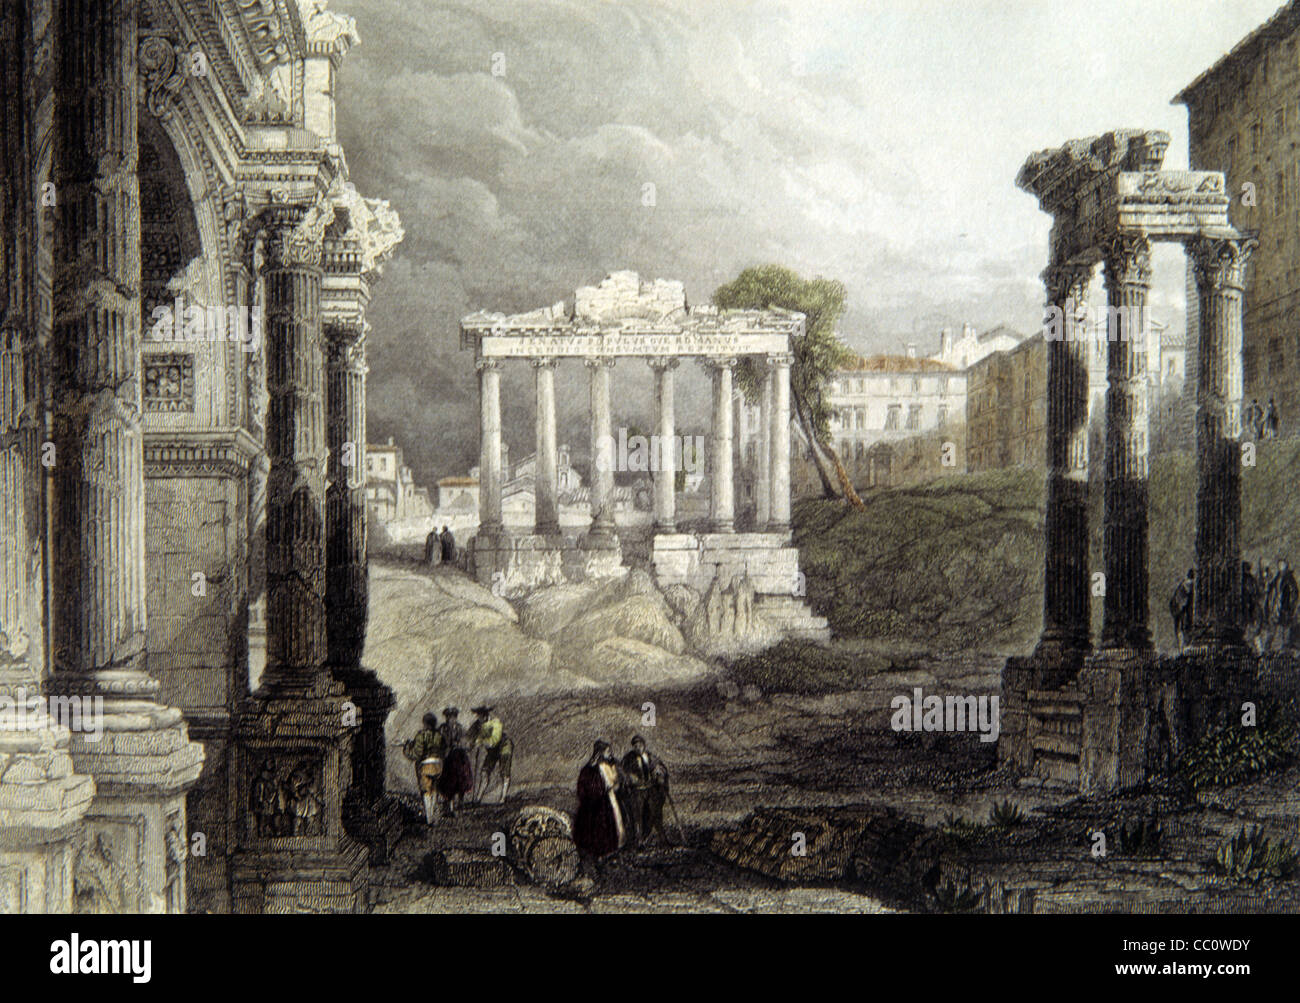 The Forum, Rome, Italy, c19th Engraving. Vinage Illustration or Steel Engraving Stock Photo